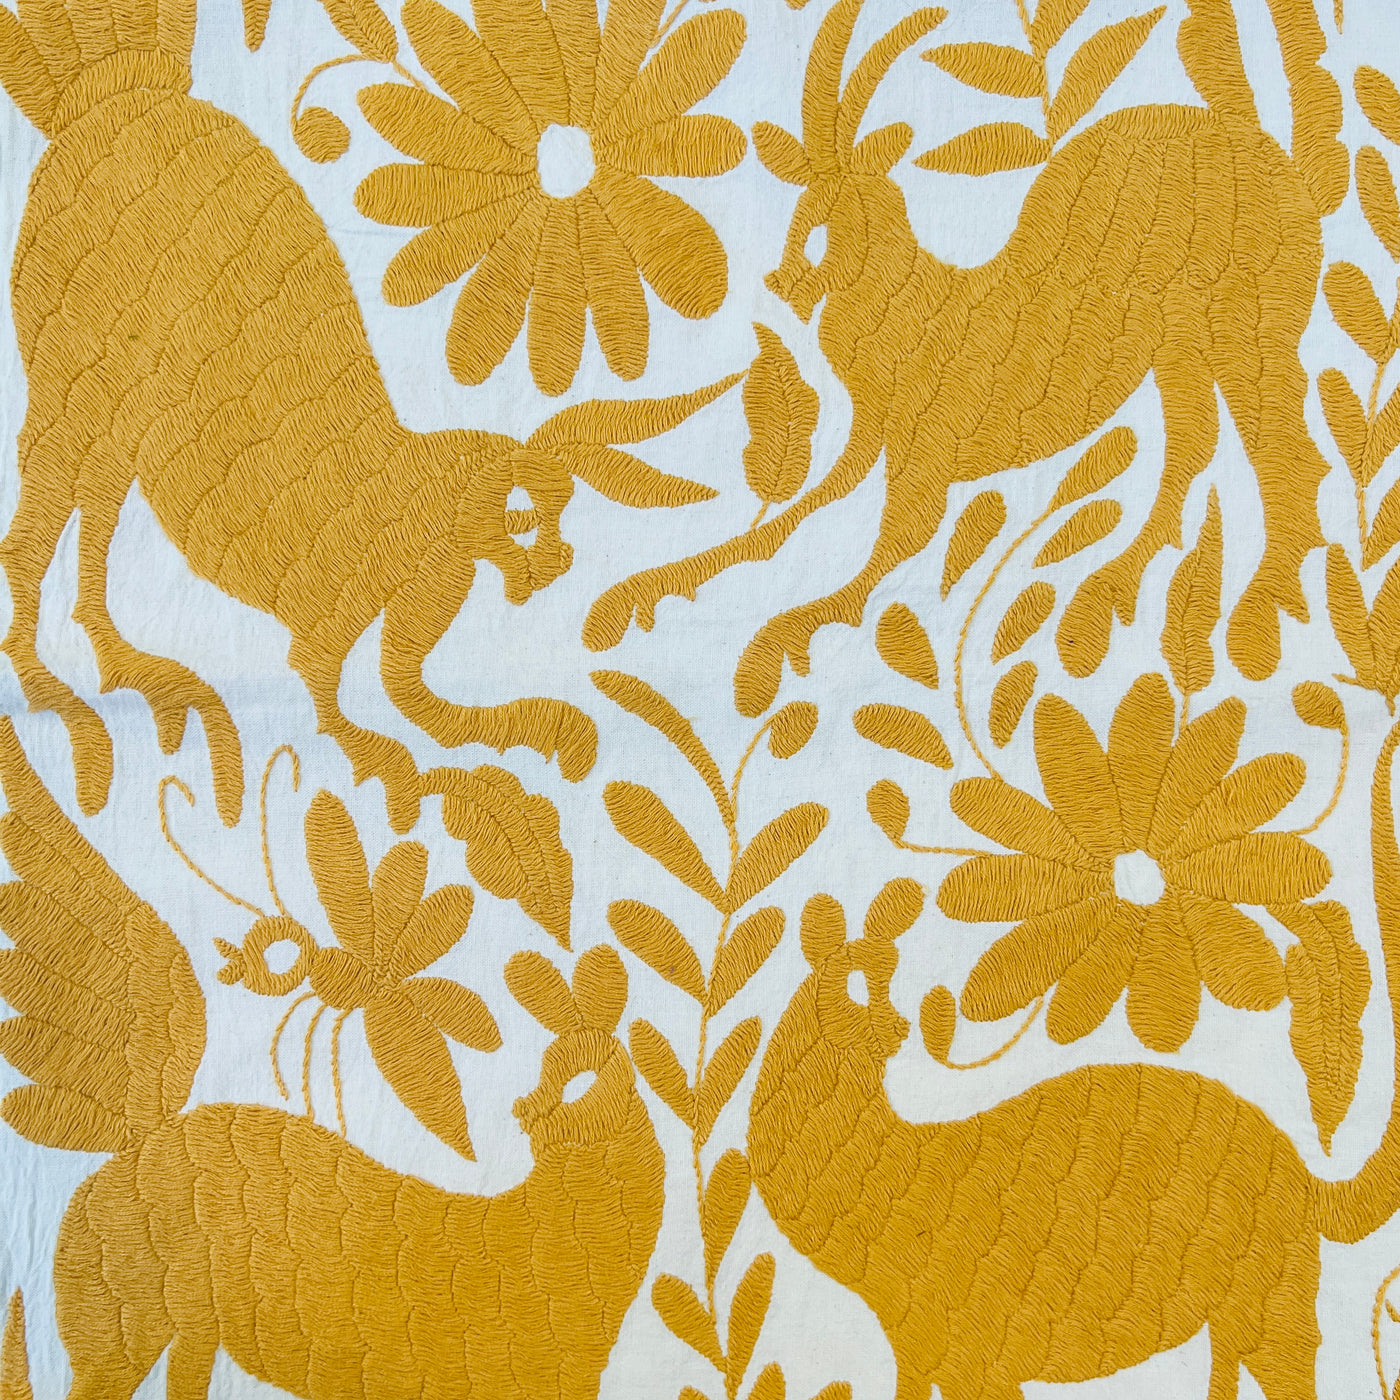 enhanced view of darker yellow floral and fauna scenery detail embroidered on off white table runner